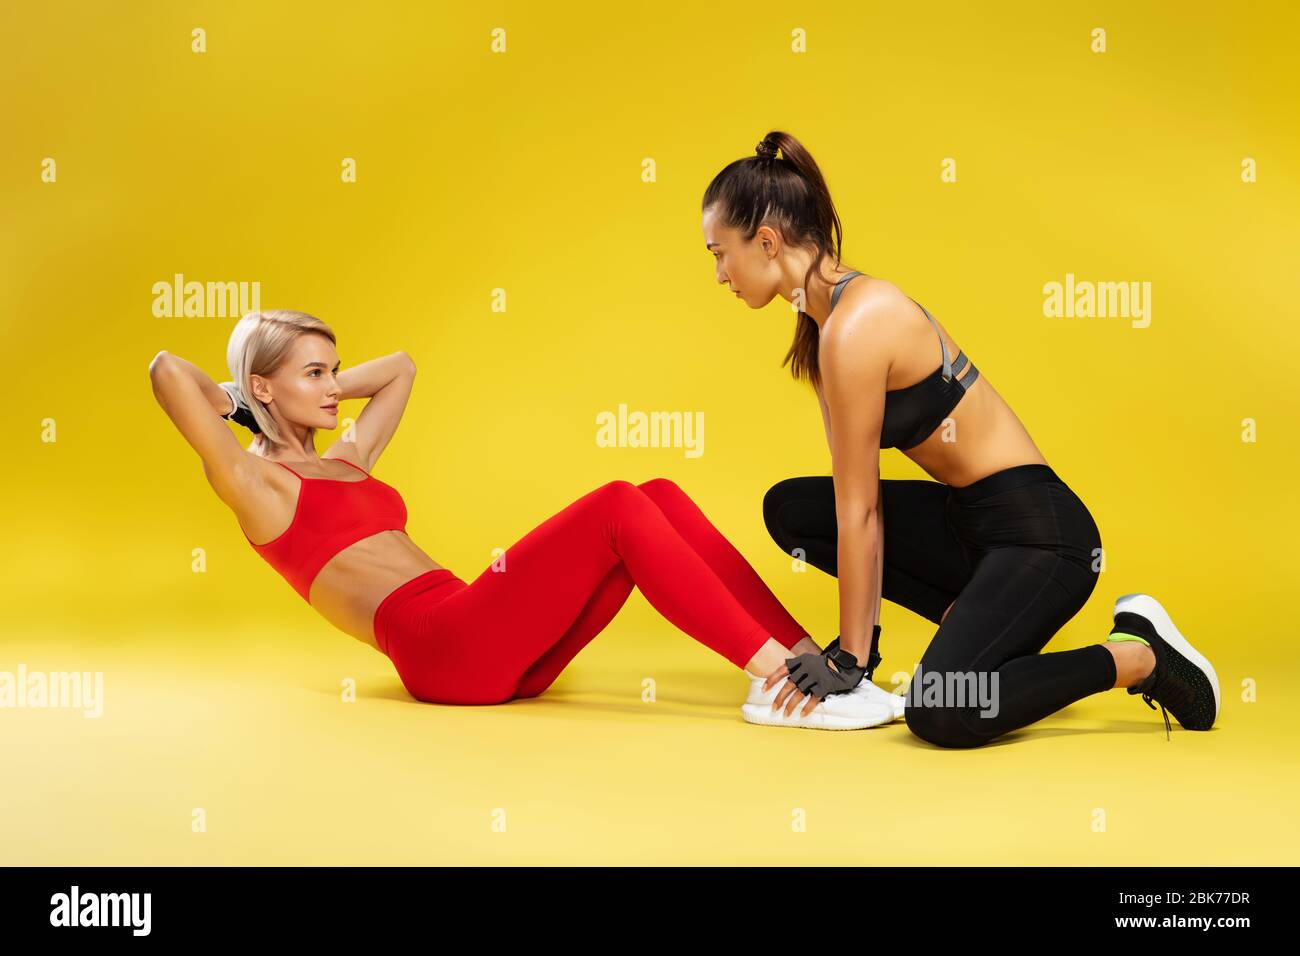 Fitness exercises. Attractive sporty blonde woman in red sportswear pumping press, exercising with personal trainer against yellow bakground Stock Photo